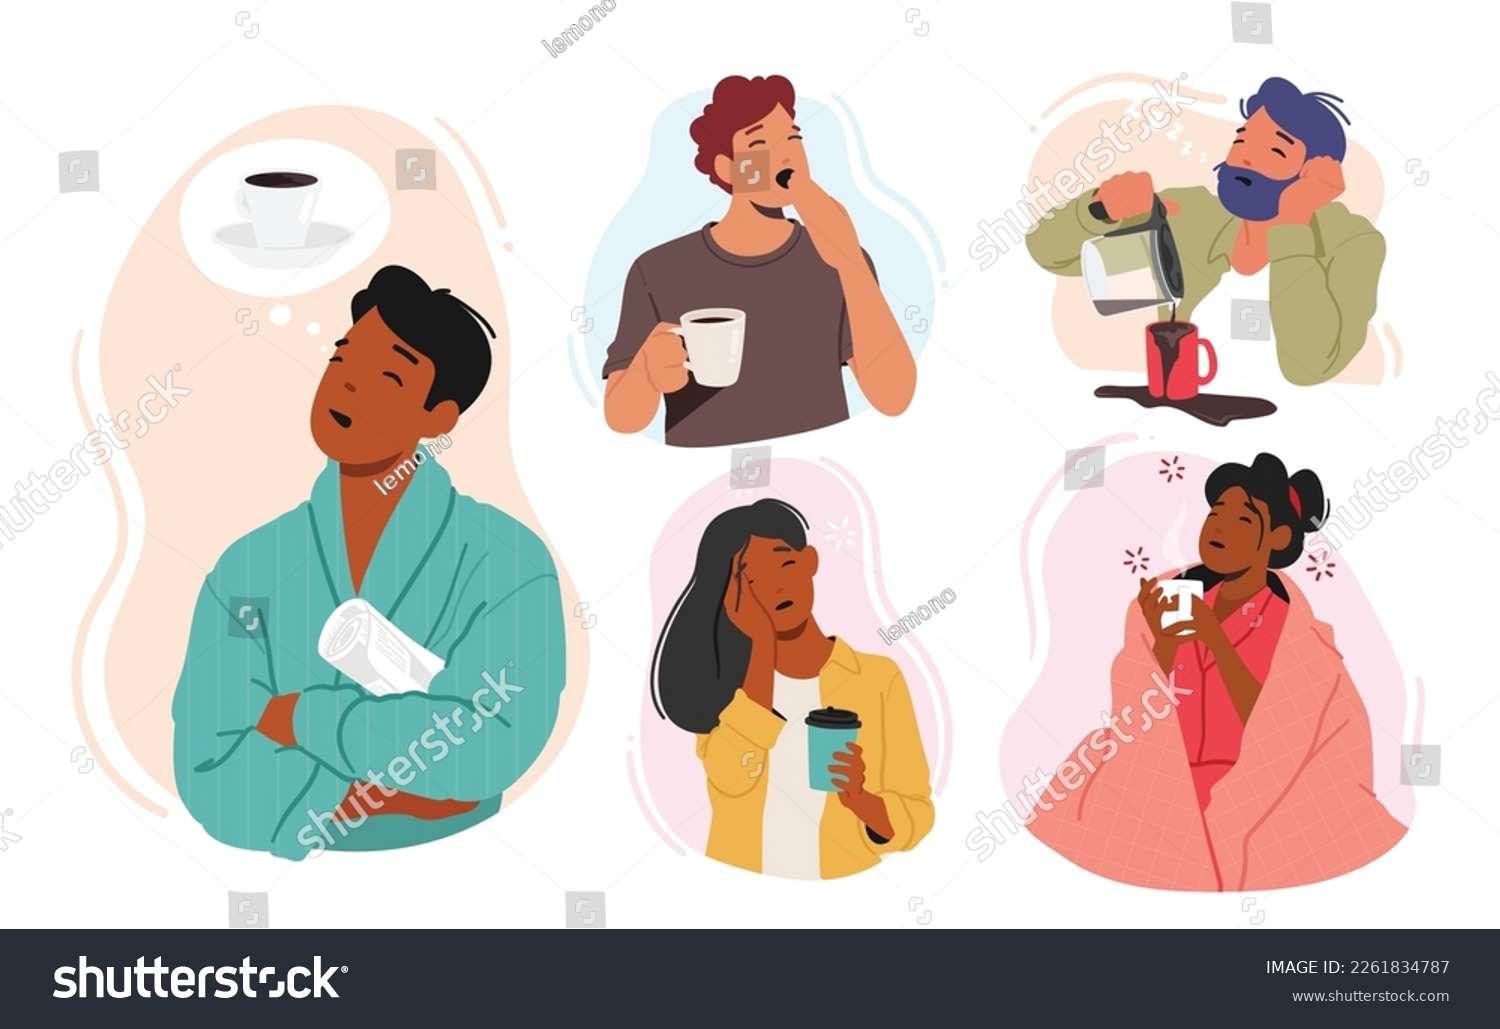 Set of Tired Sleepy People Needing Coffee. Drowsy Male Female Characters In Need Of A Caffeine Fix or Energy Drinks. Struggle To Be Awake And Alert for Work Productivity. Cartoon Vector Illustration #2261834787